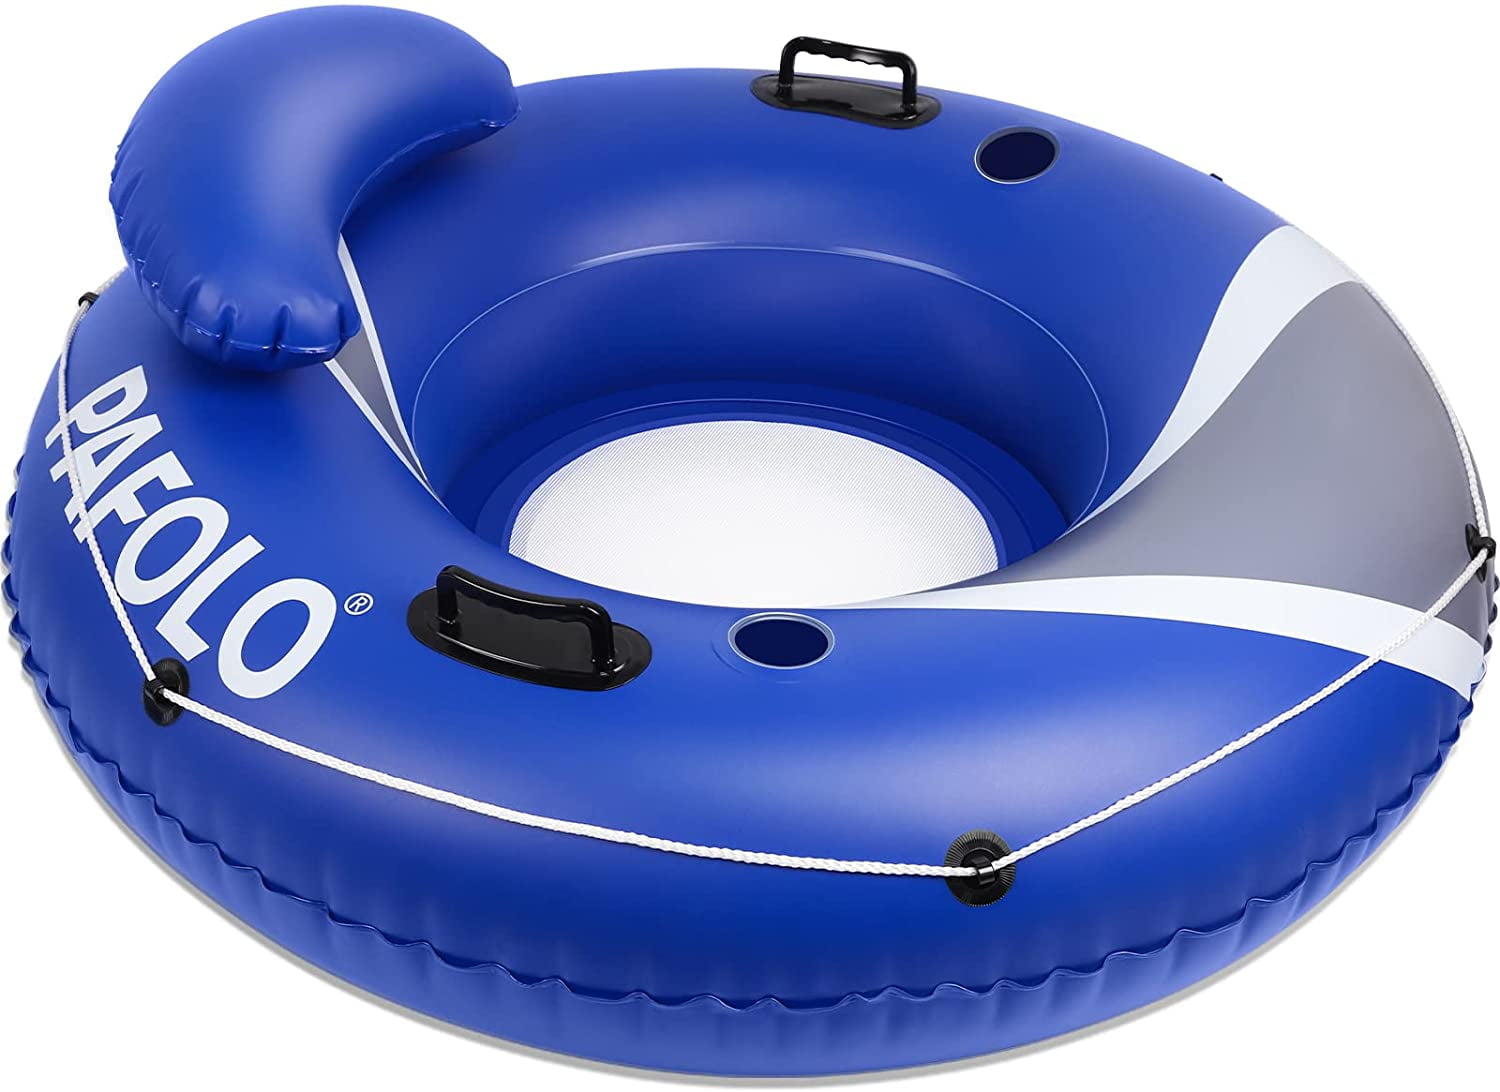 PAFOLO Pool Float Adult, River Tubes for Floating Heavy Duty, River Floats  with Mesh Bottom, 2 Cup Holders, 2 Heavy-Duty Handles, Headrest, 53  Inflatable Float Tube for Beach Lake Rafting 